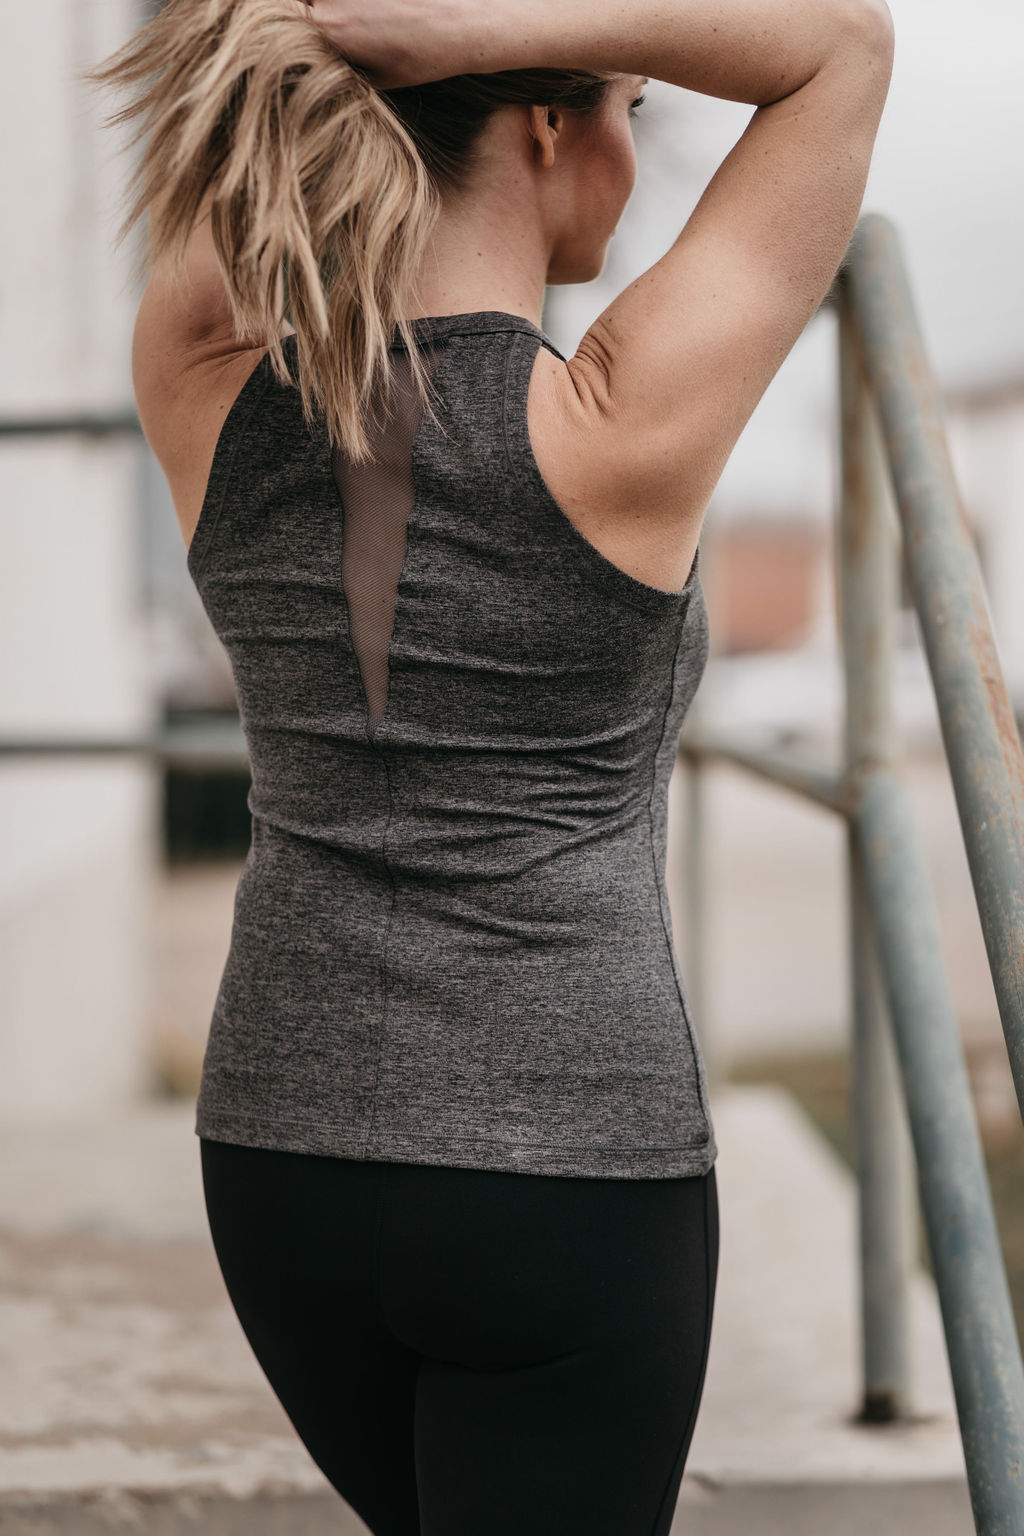 dallas blogger athleisure clothing line - one small blonde